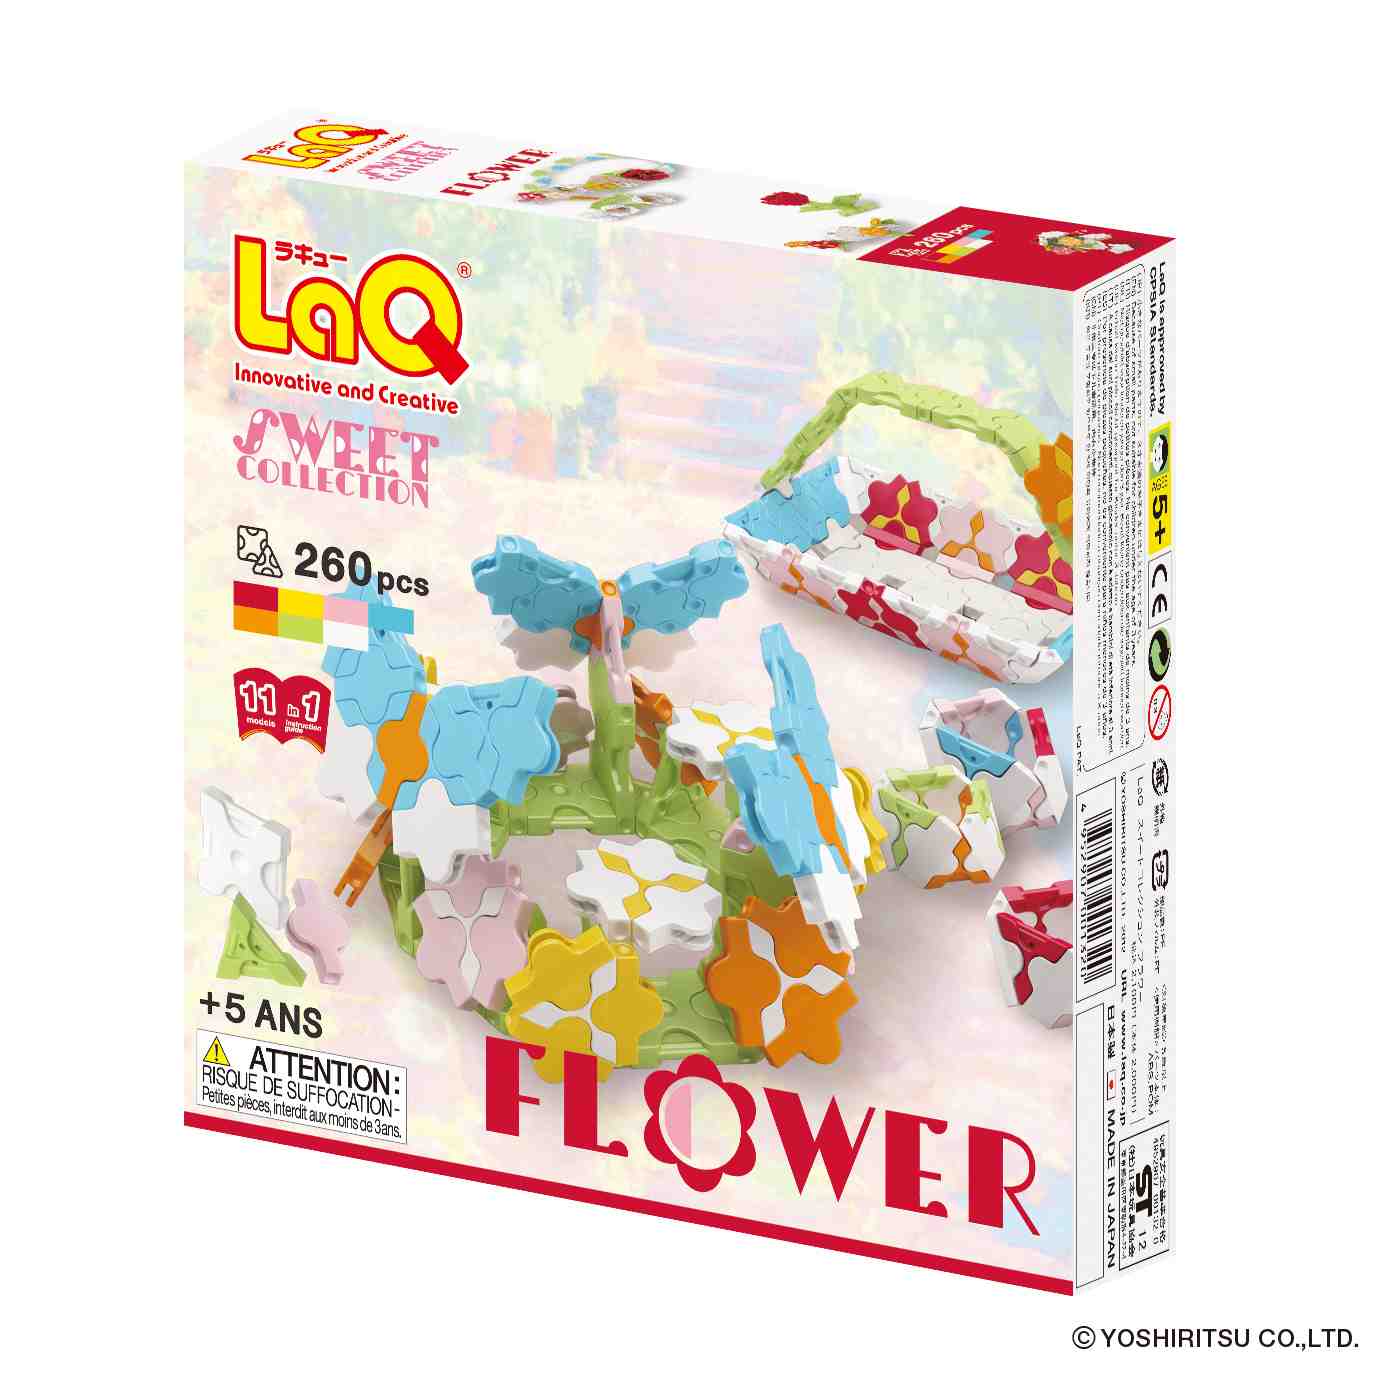 LaQ SWEET COLLECTION FLOWER - 11 MODELS, 260 PIECES